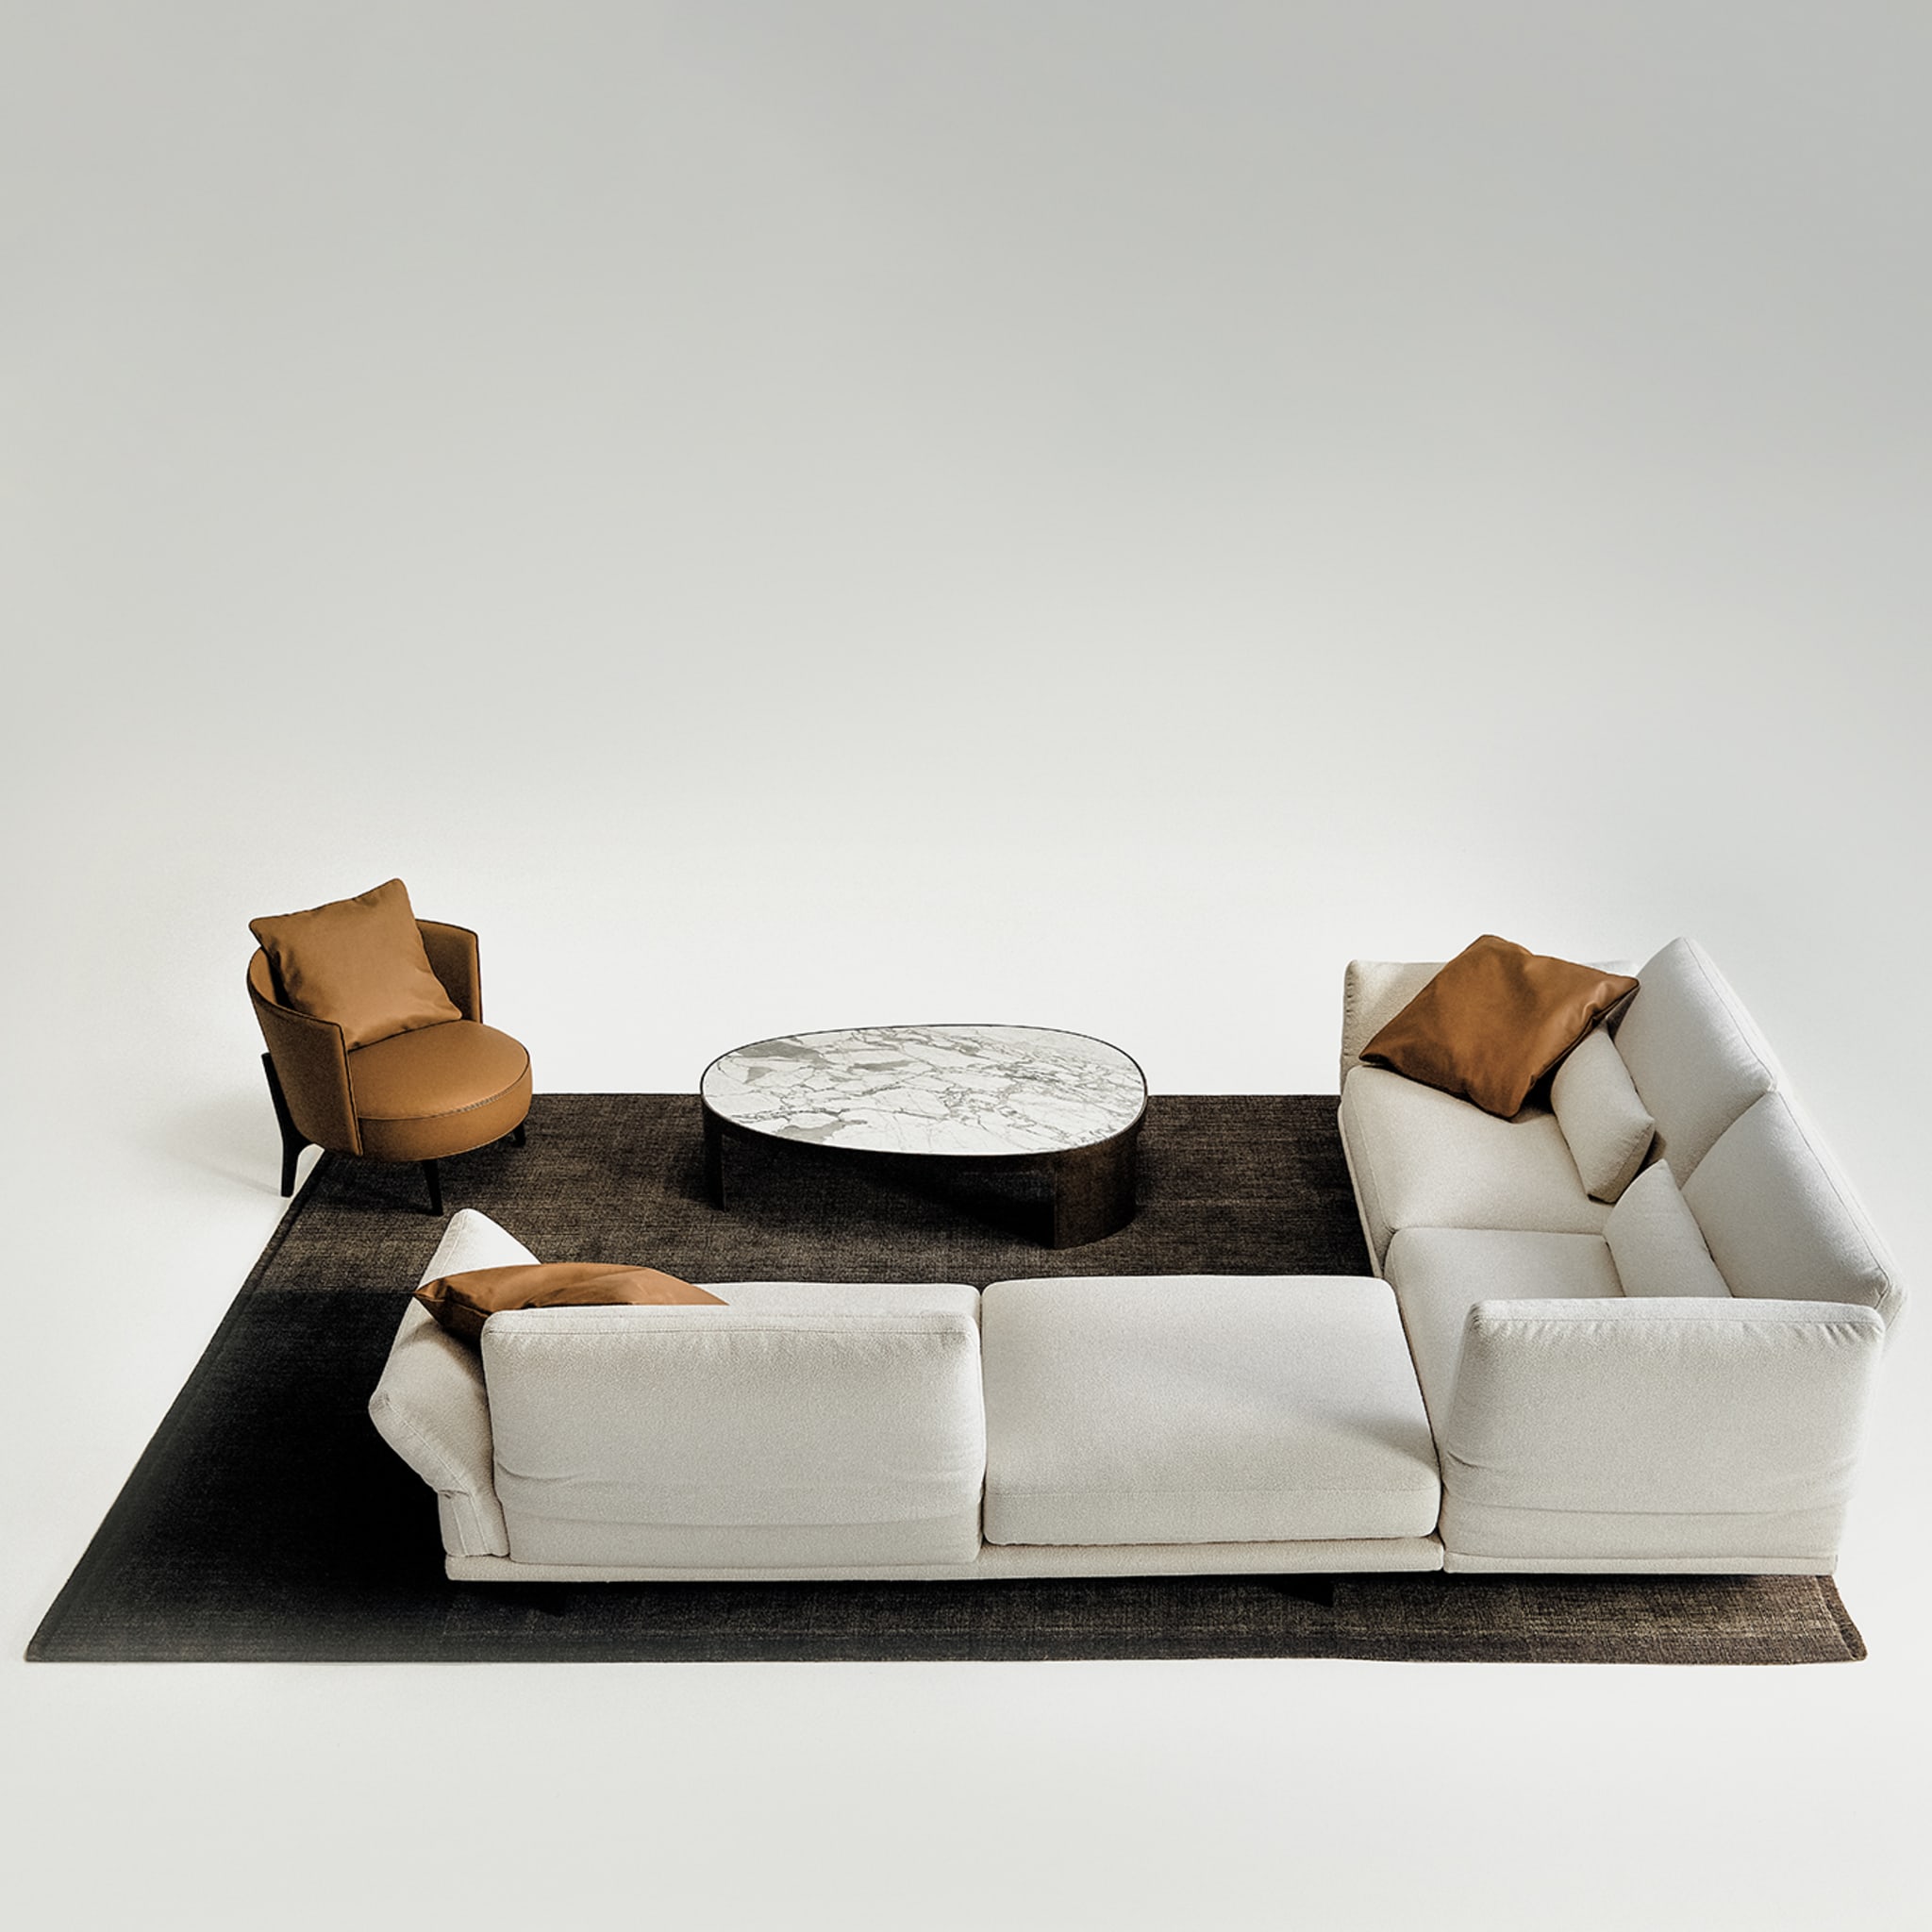 Kyoto White Marble Coffee Table by Ludovica + Roberto Palomba - Alternative view 1